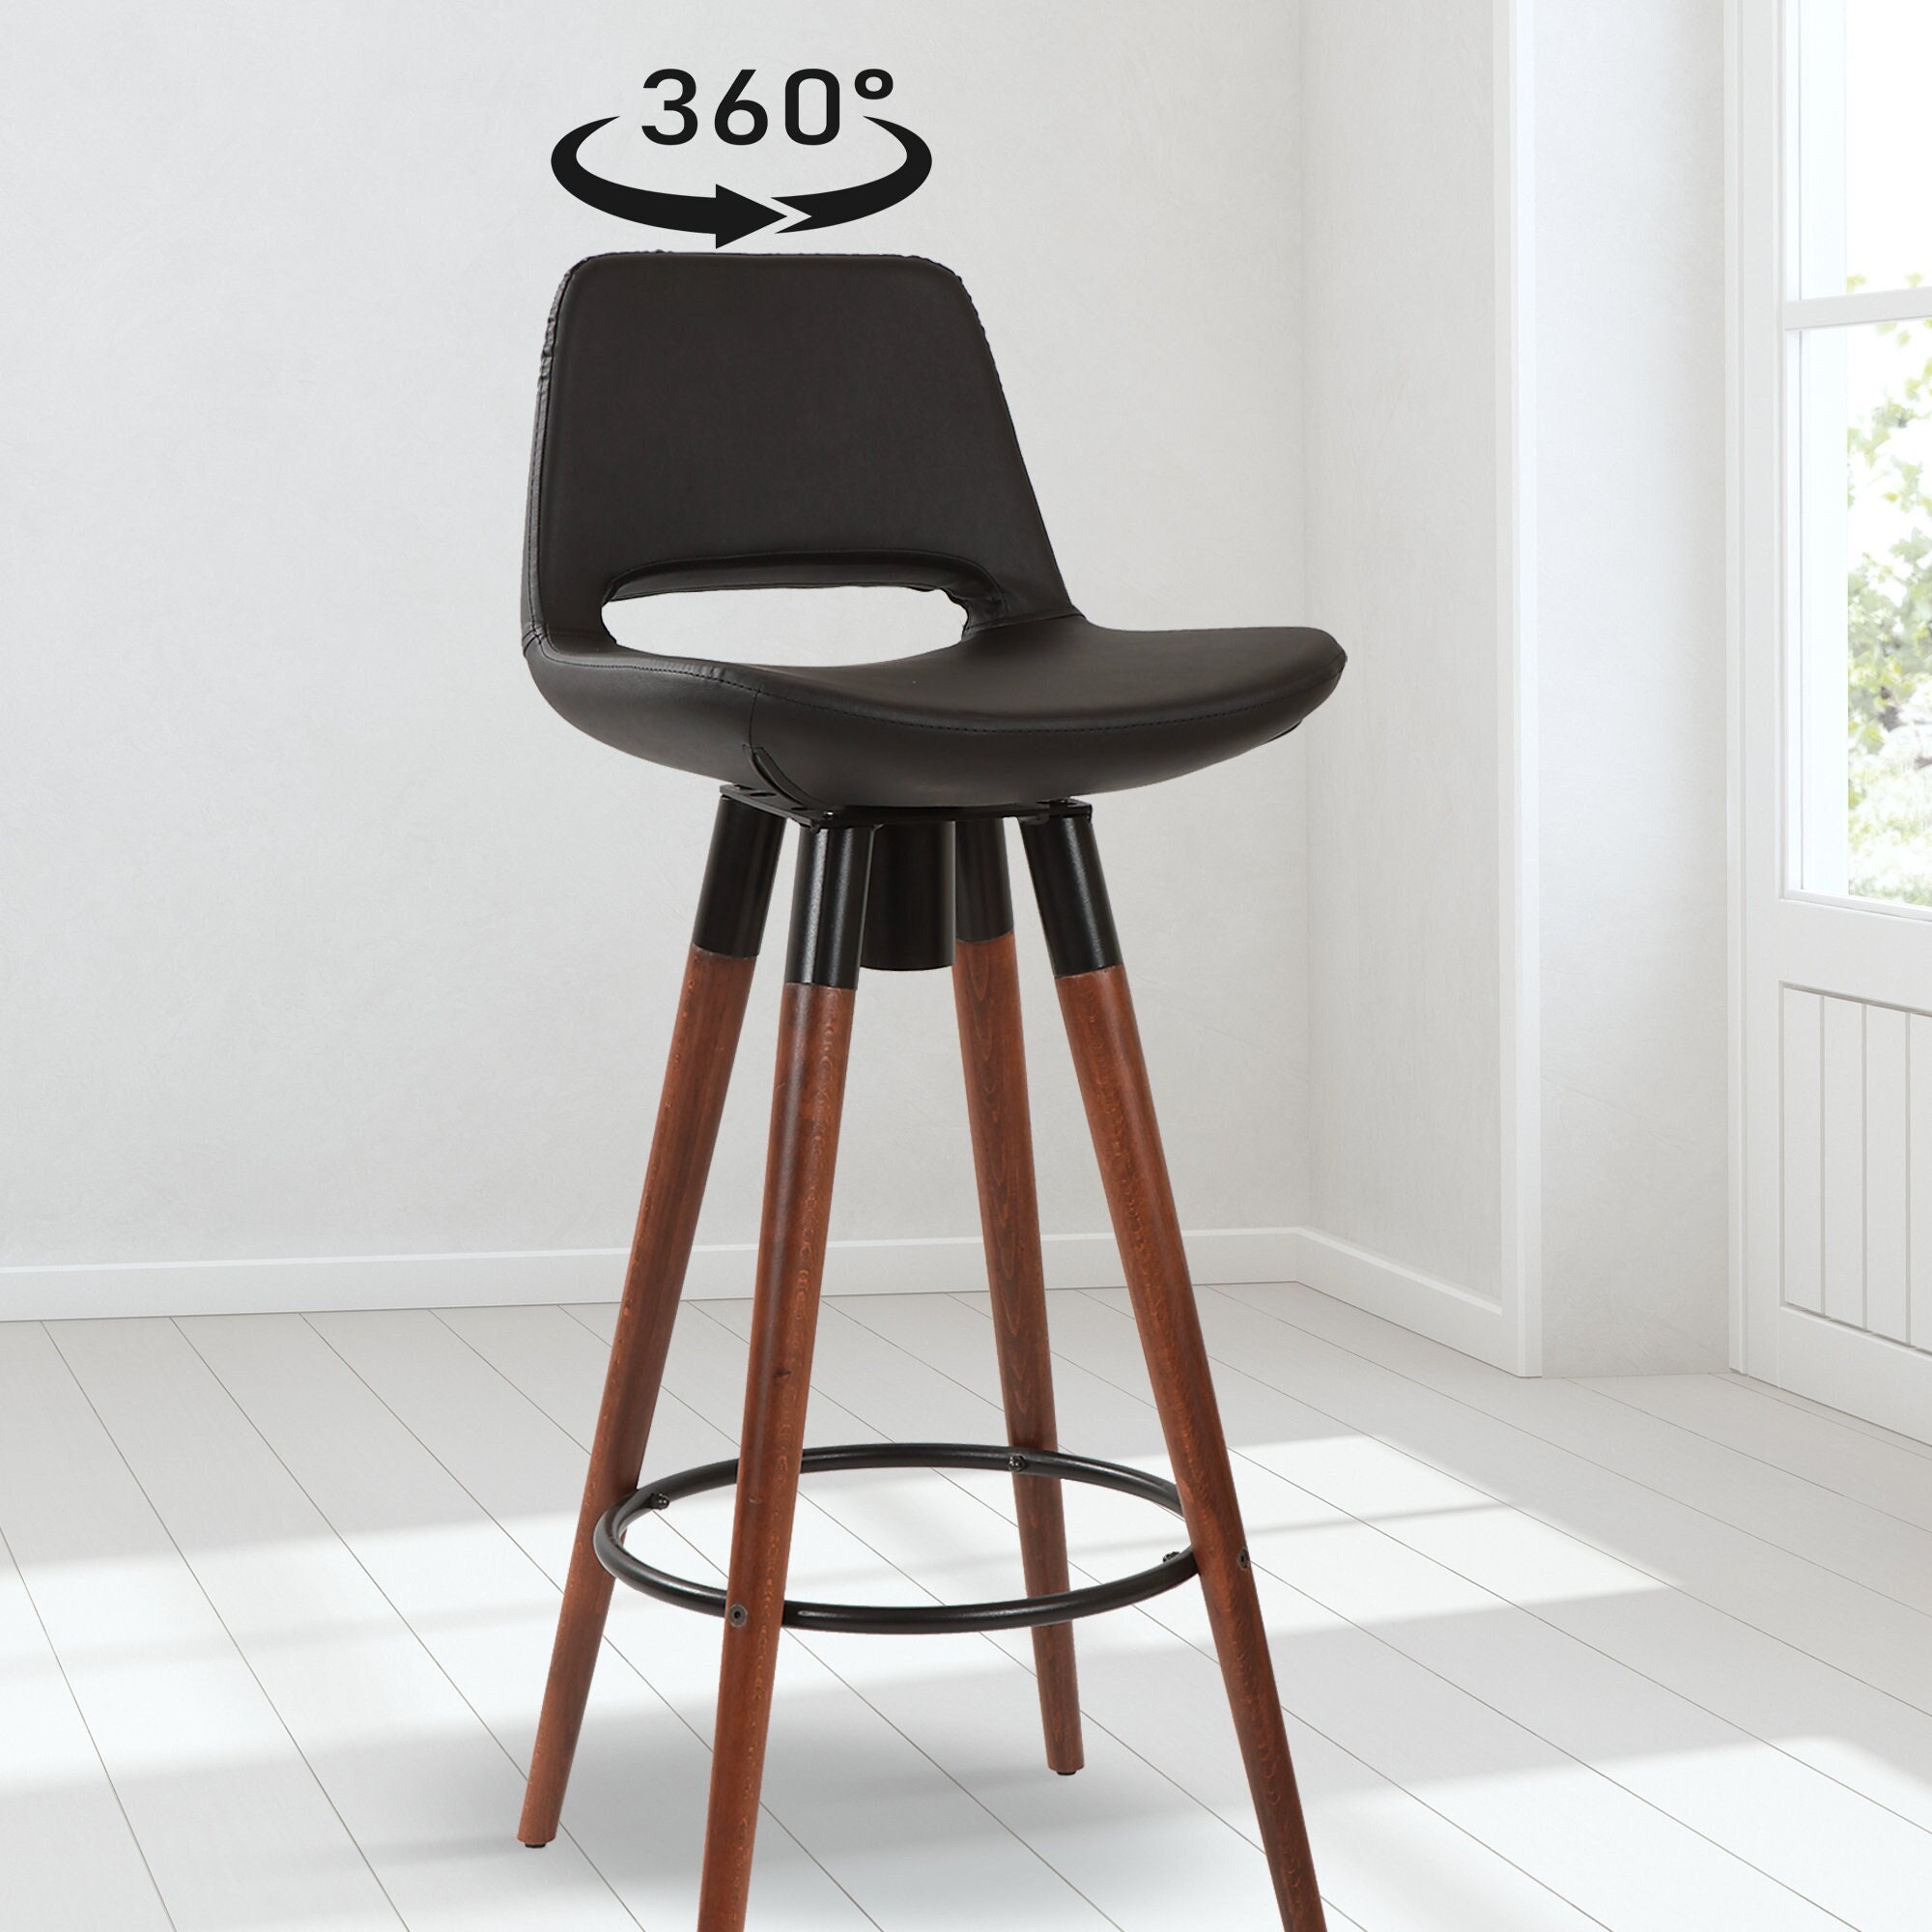 Adjustable Industrial Bar Stool With Back Support - Best of Exports